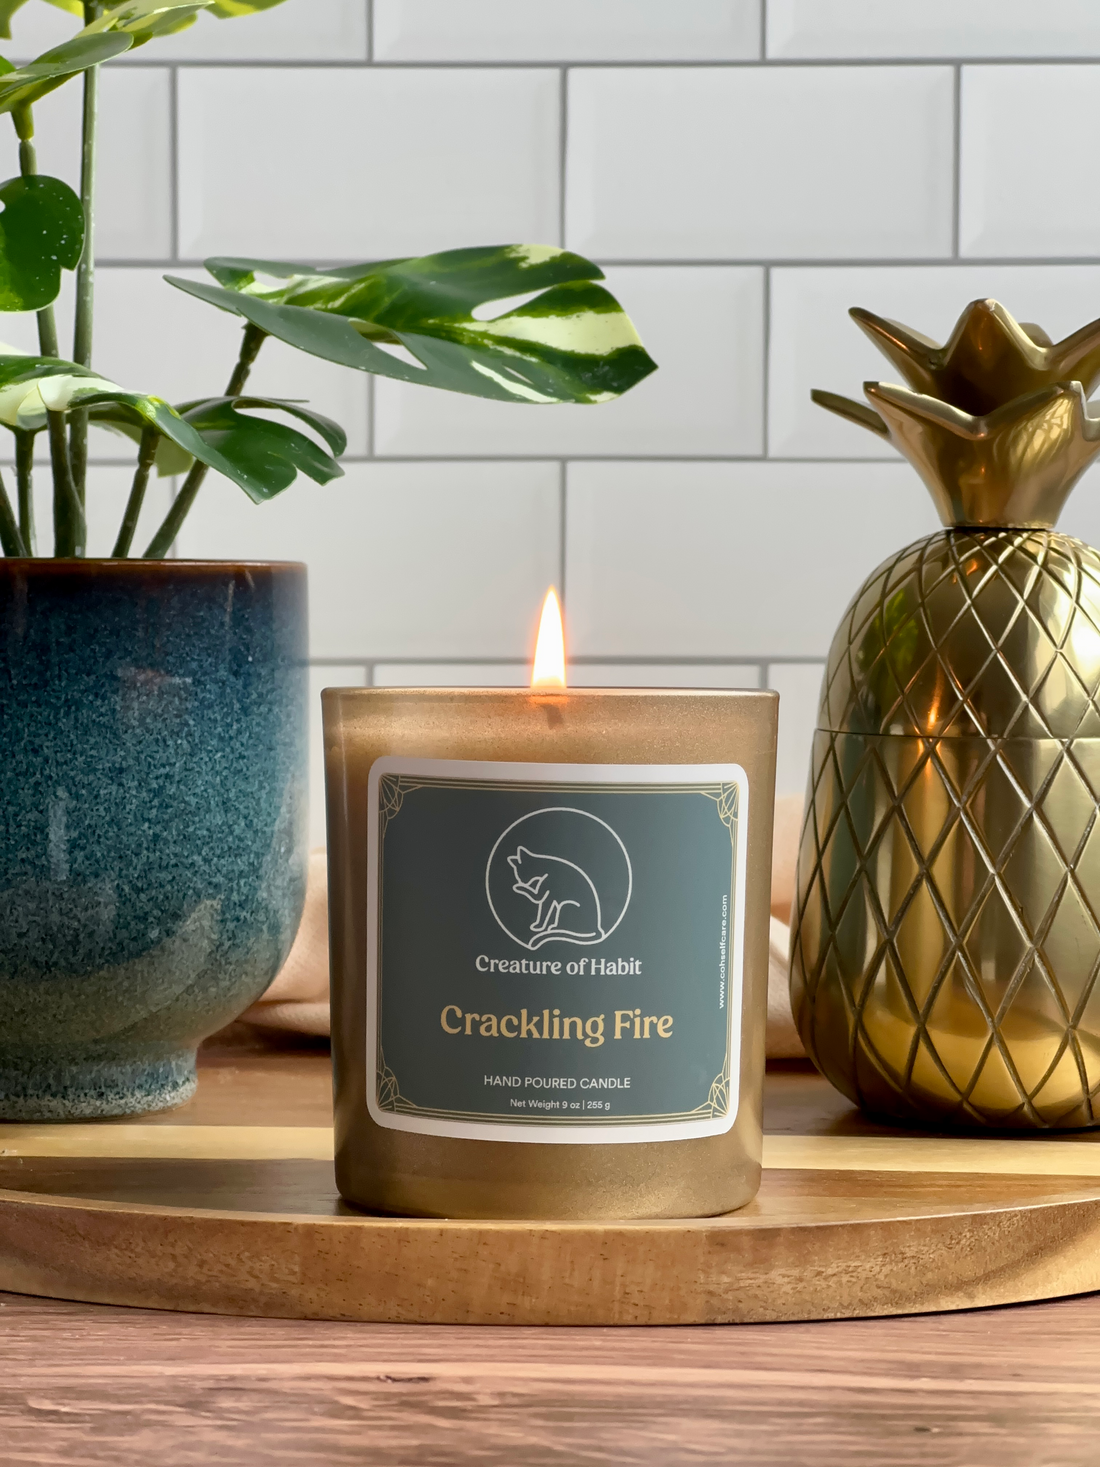 A lit soy candle within a golden vessel is placed on top of a wooden tray, next to a small houseplant and golden pineapple paperweight. The label is greyish cyan featuring the logo of a white cat silhouette, the name of the company Creature of Habit, and the scent name Crackling Fire.